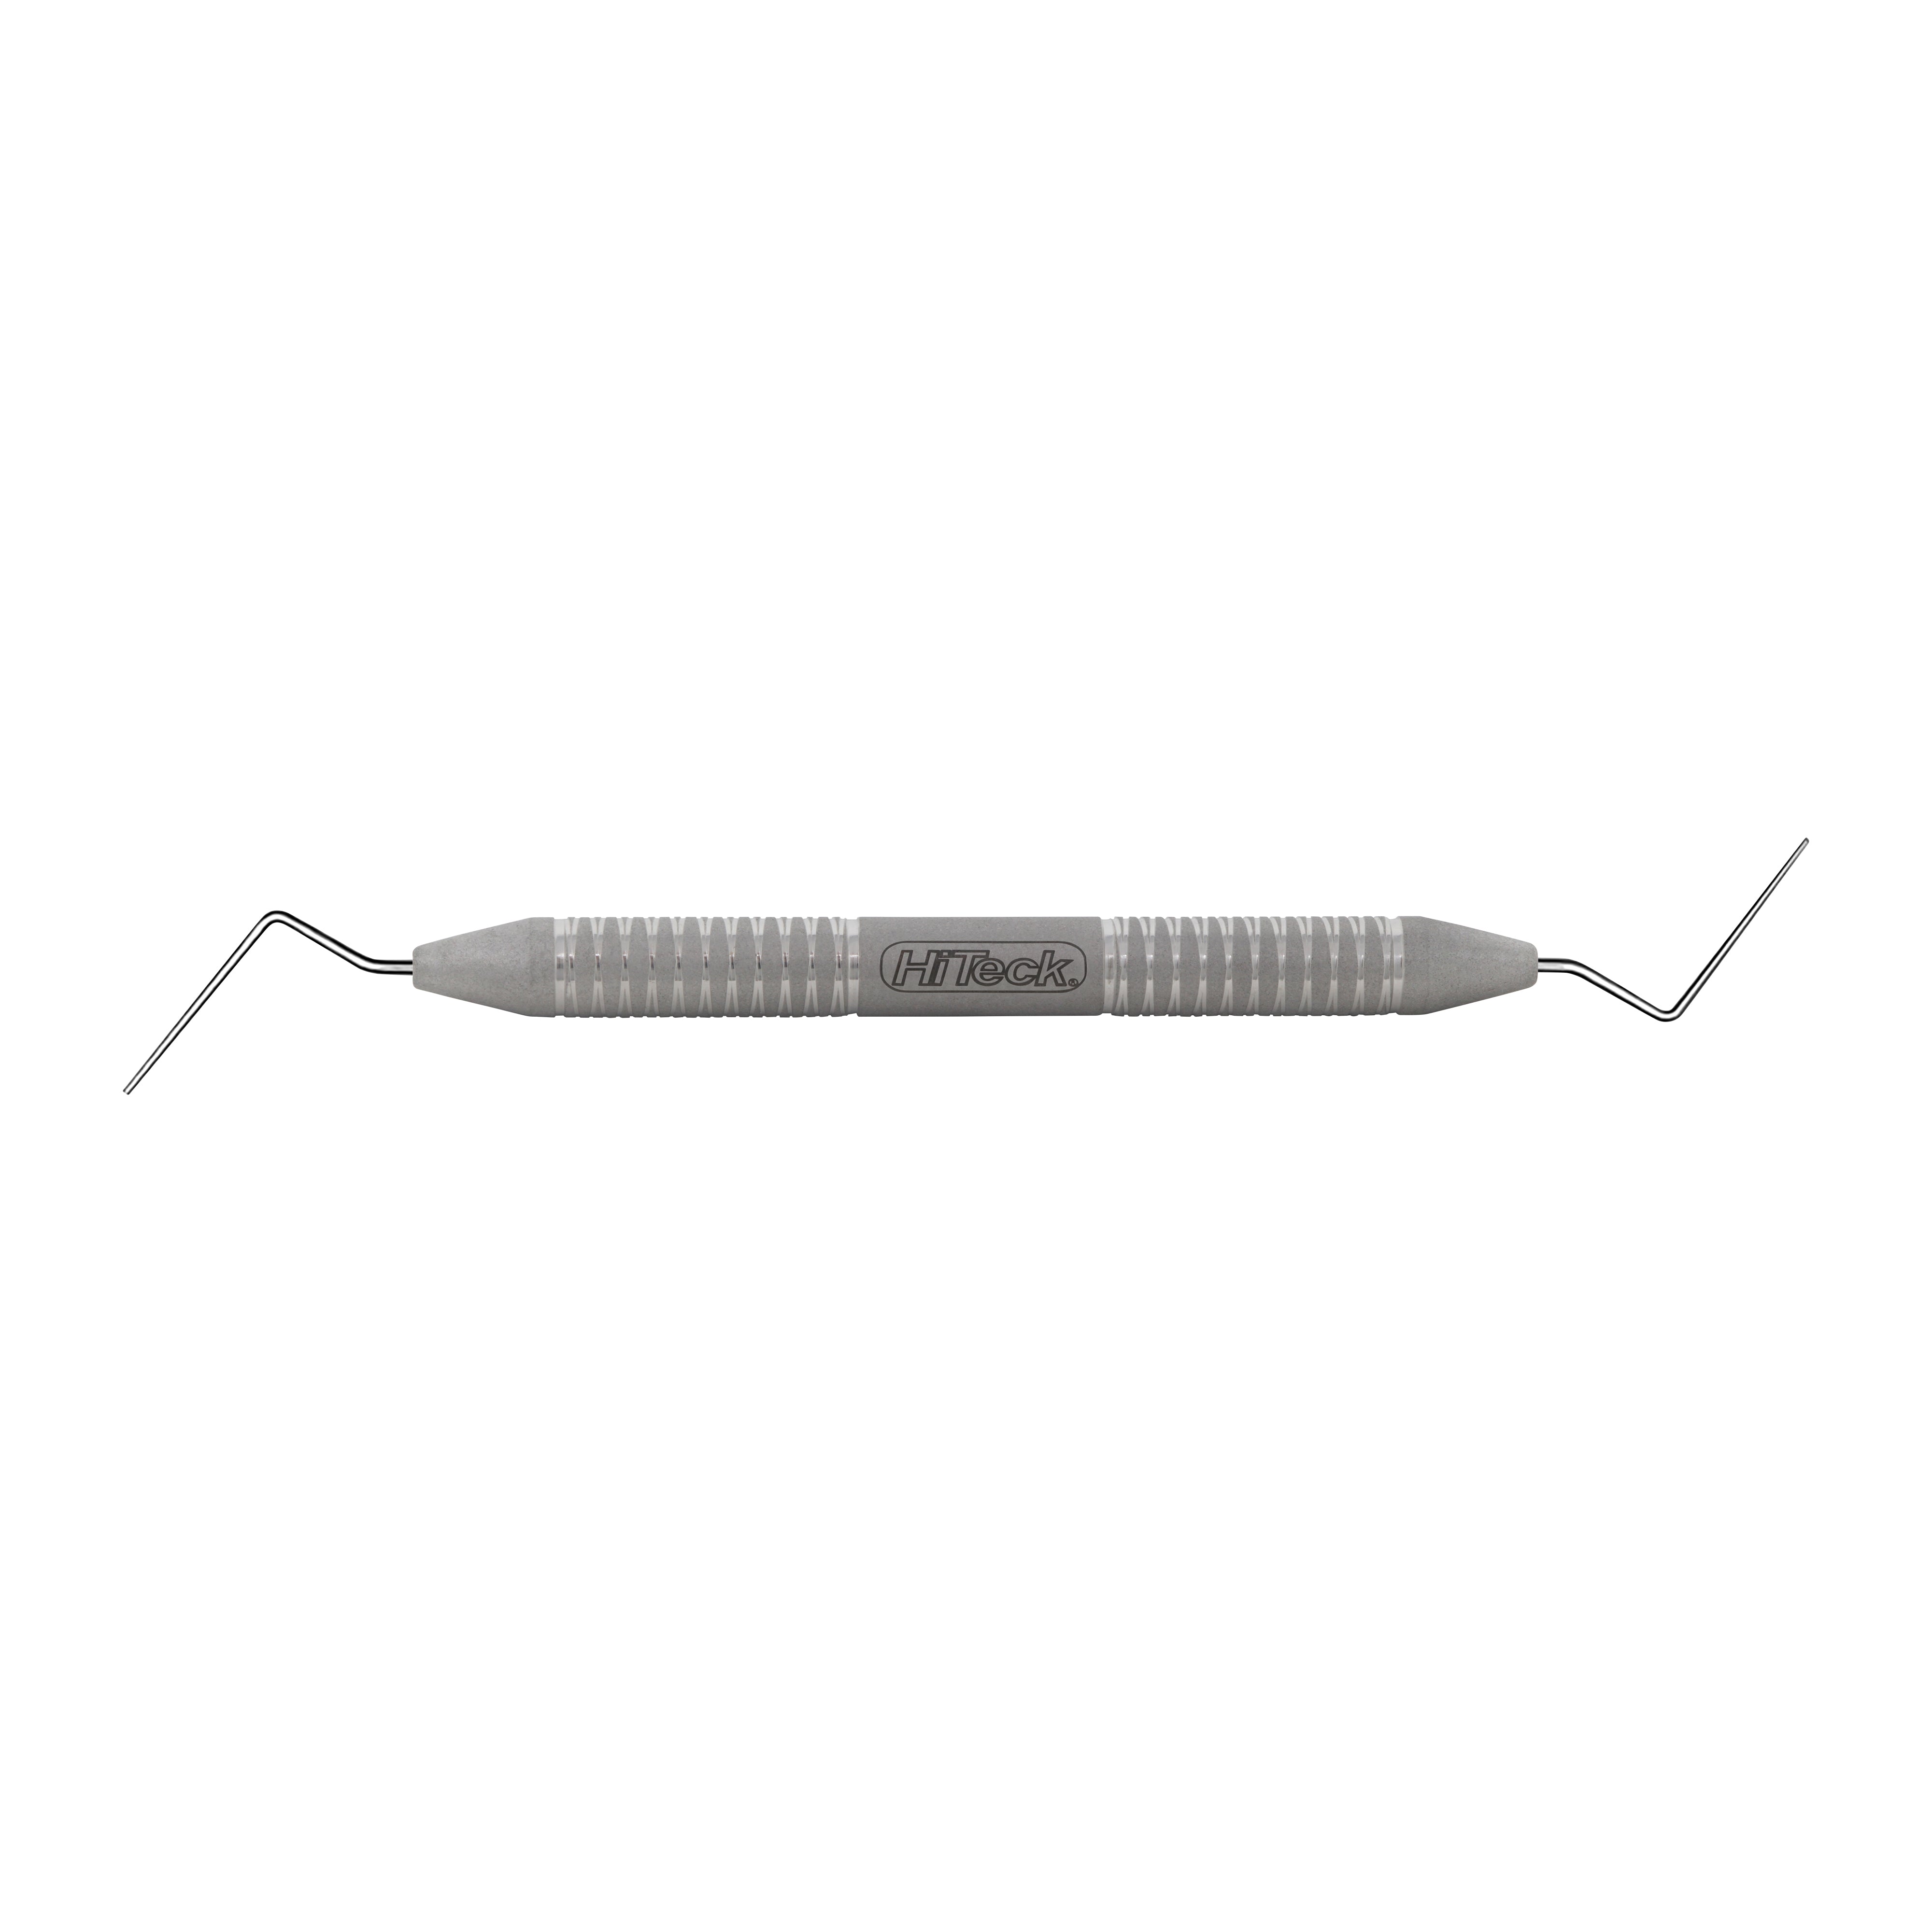 5/7 Root Canal Plugger, .50/.75, 21MM - HiTeck Medical Instruments